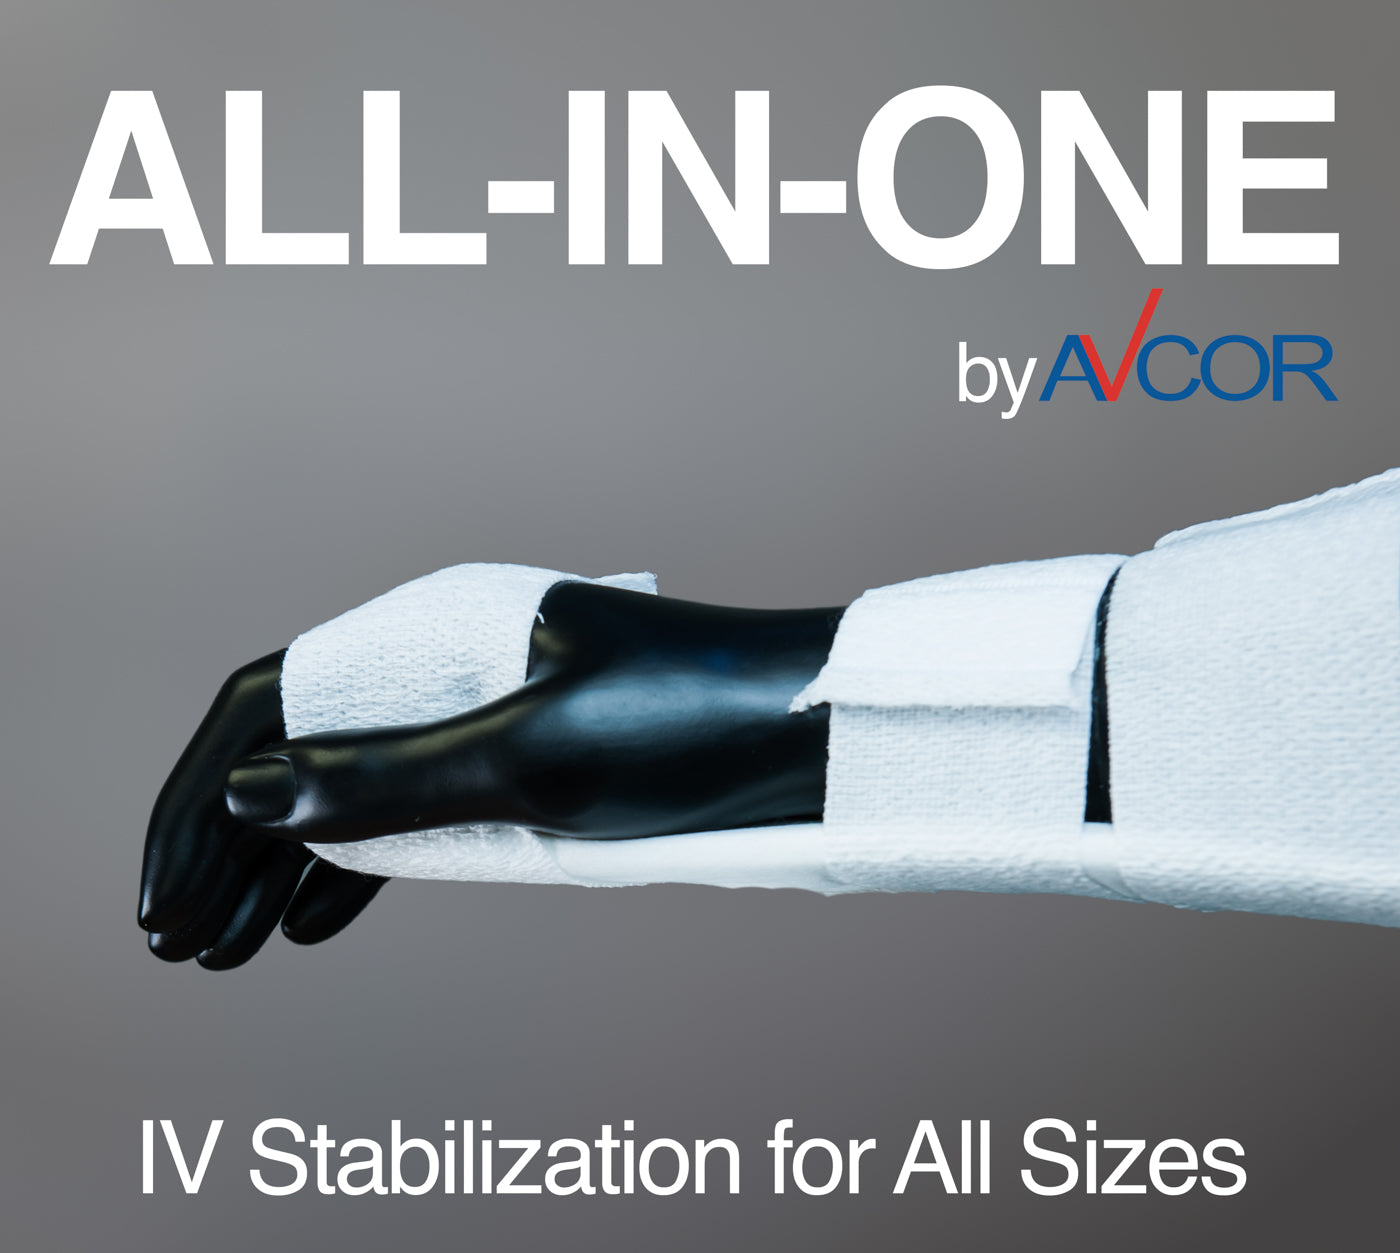 The AVCOR All-in-One in action! IV Stabilization for All Sizes!